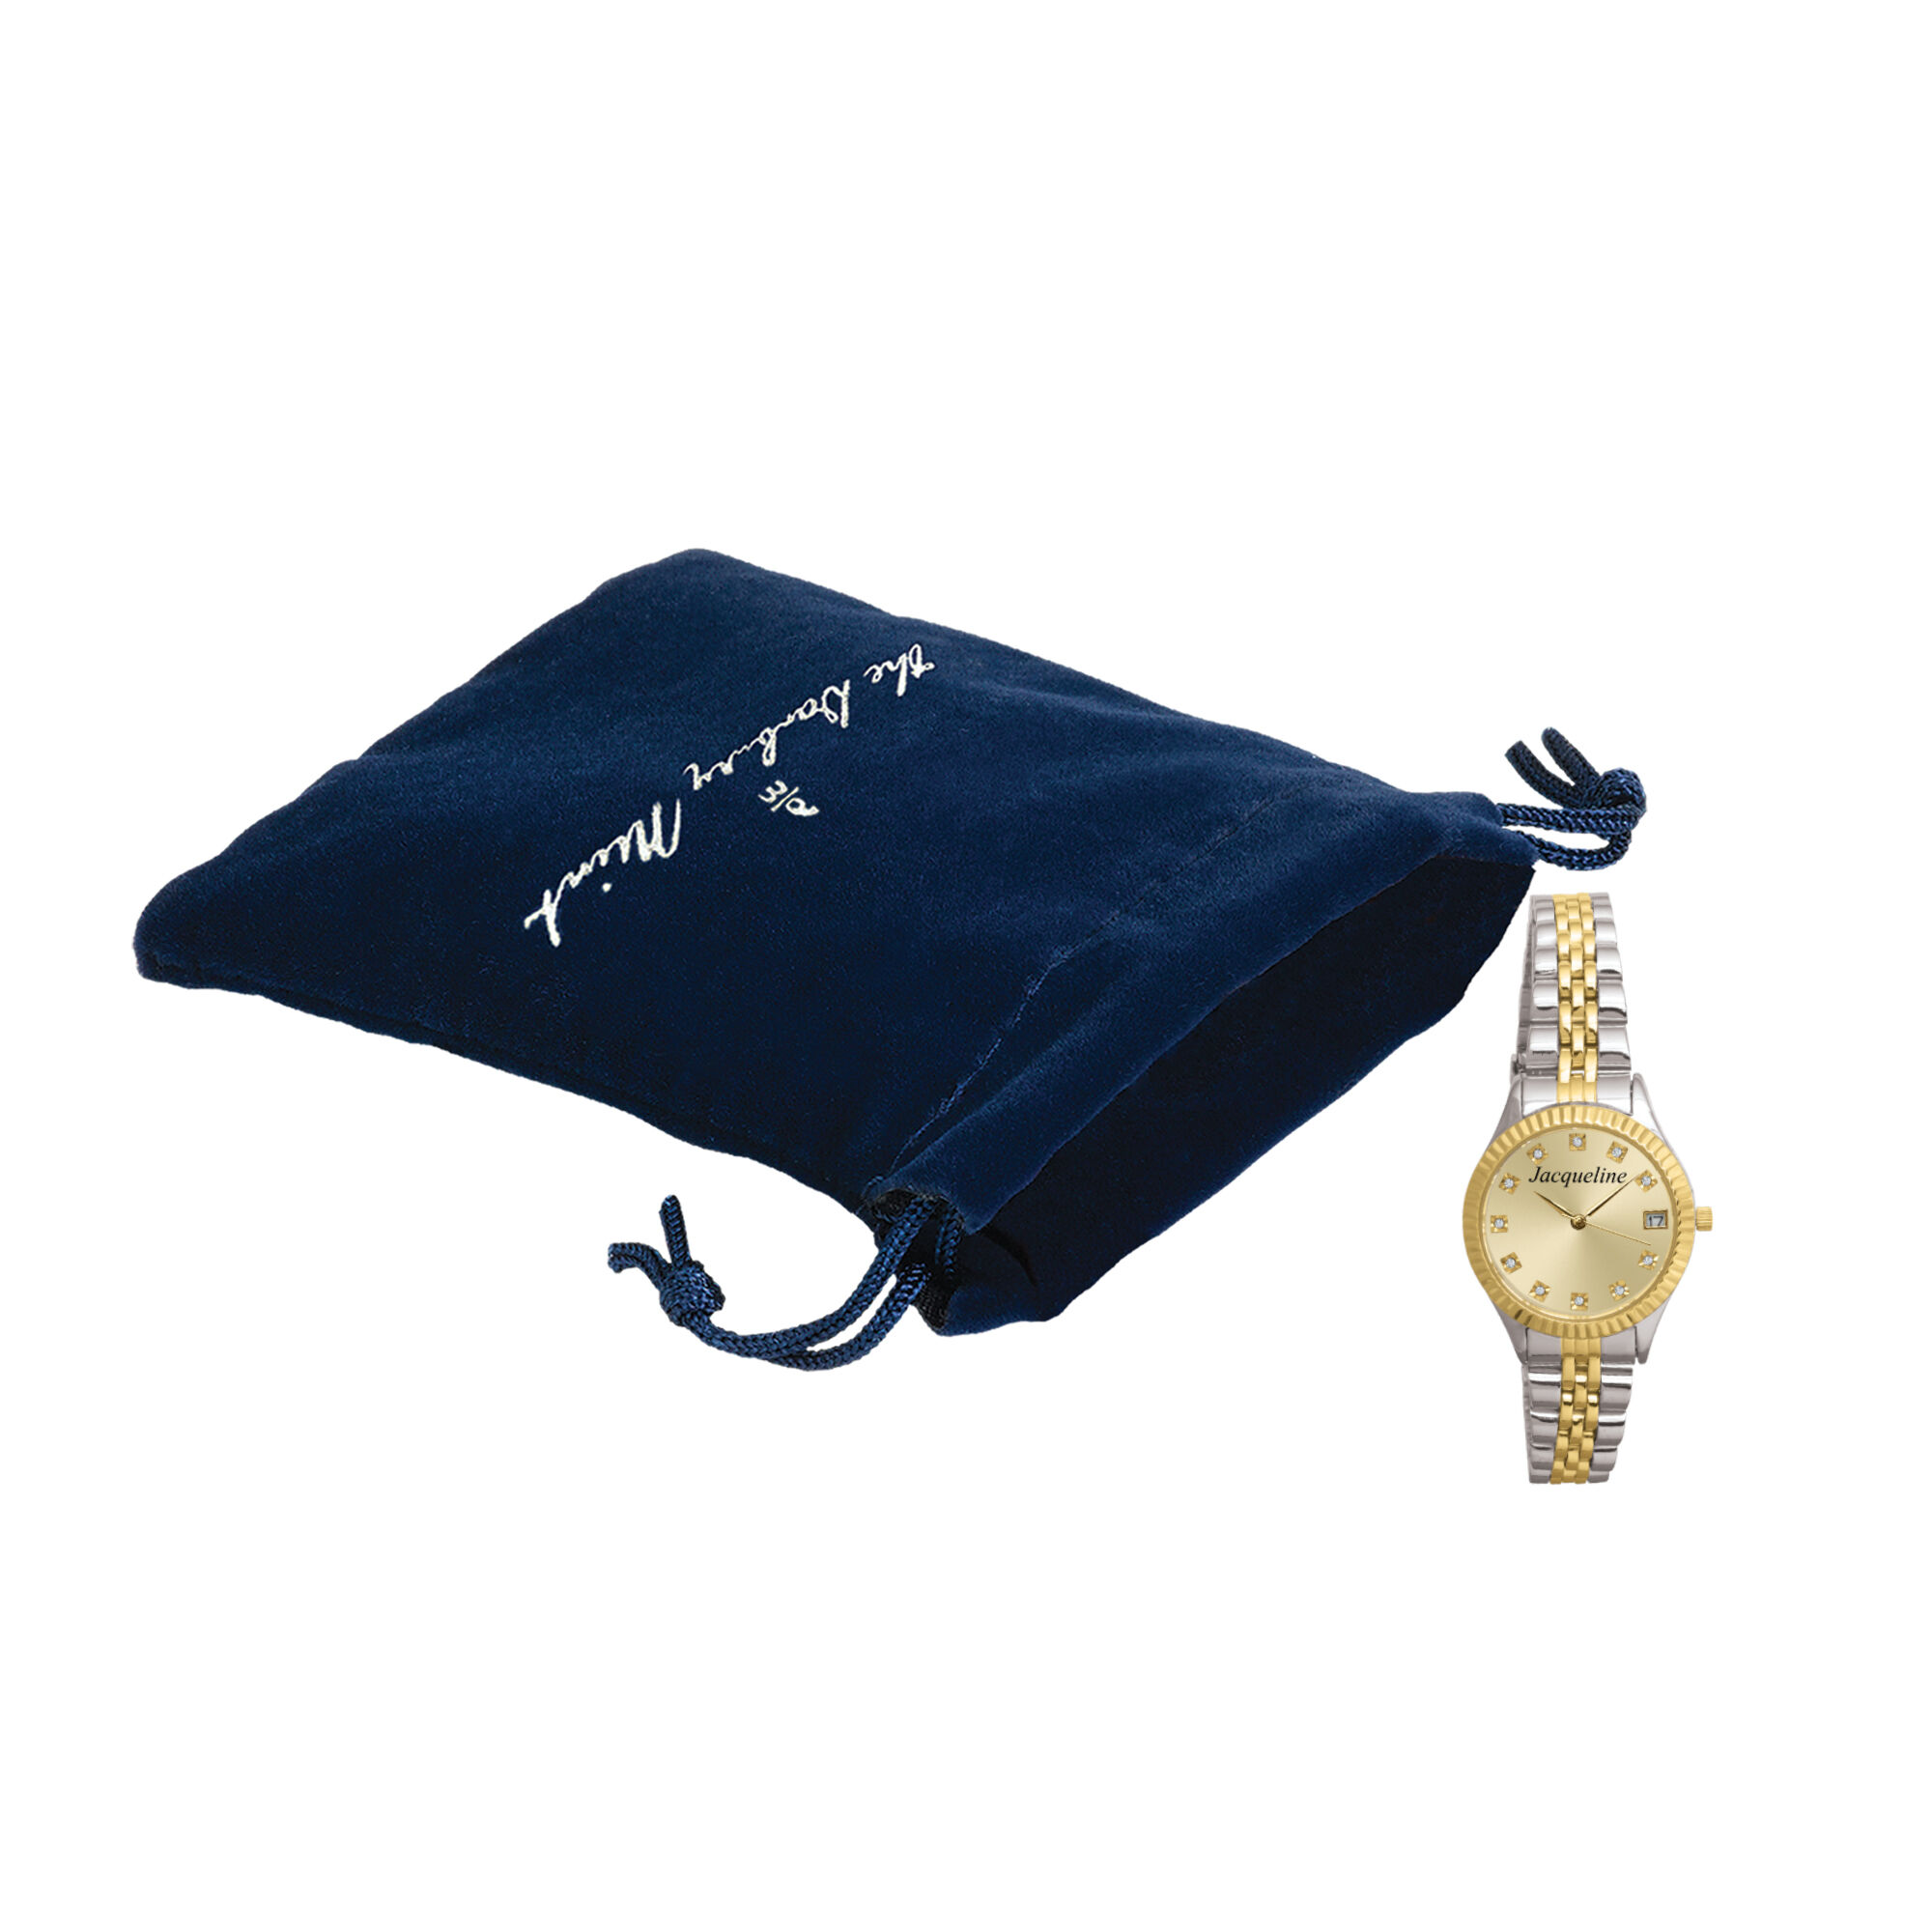 The Classic Custom Watch 11310 0010 m gift pouch